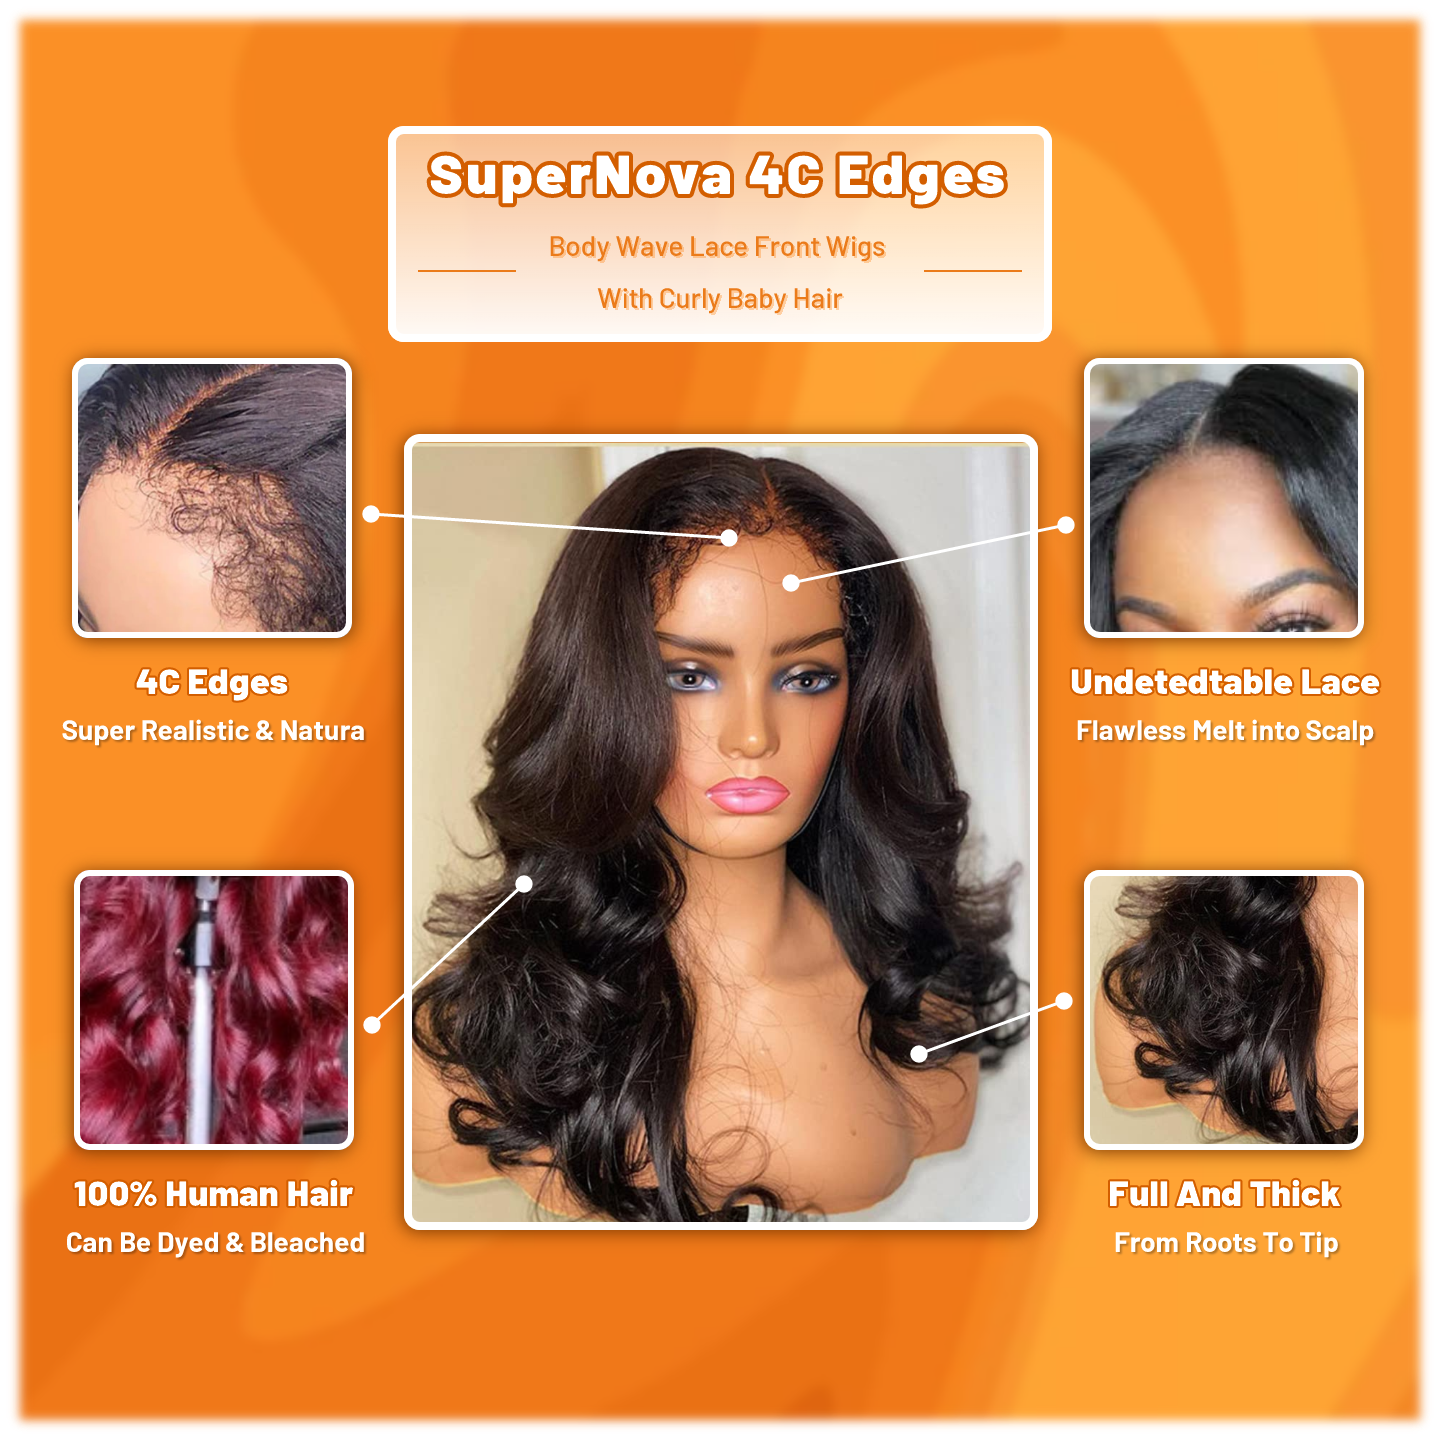 4C Edges Body Wave Lace Front Wigs With Curly Baby Hair 